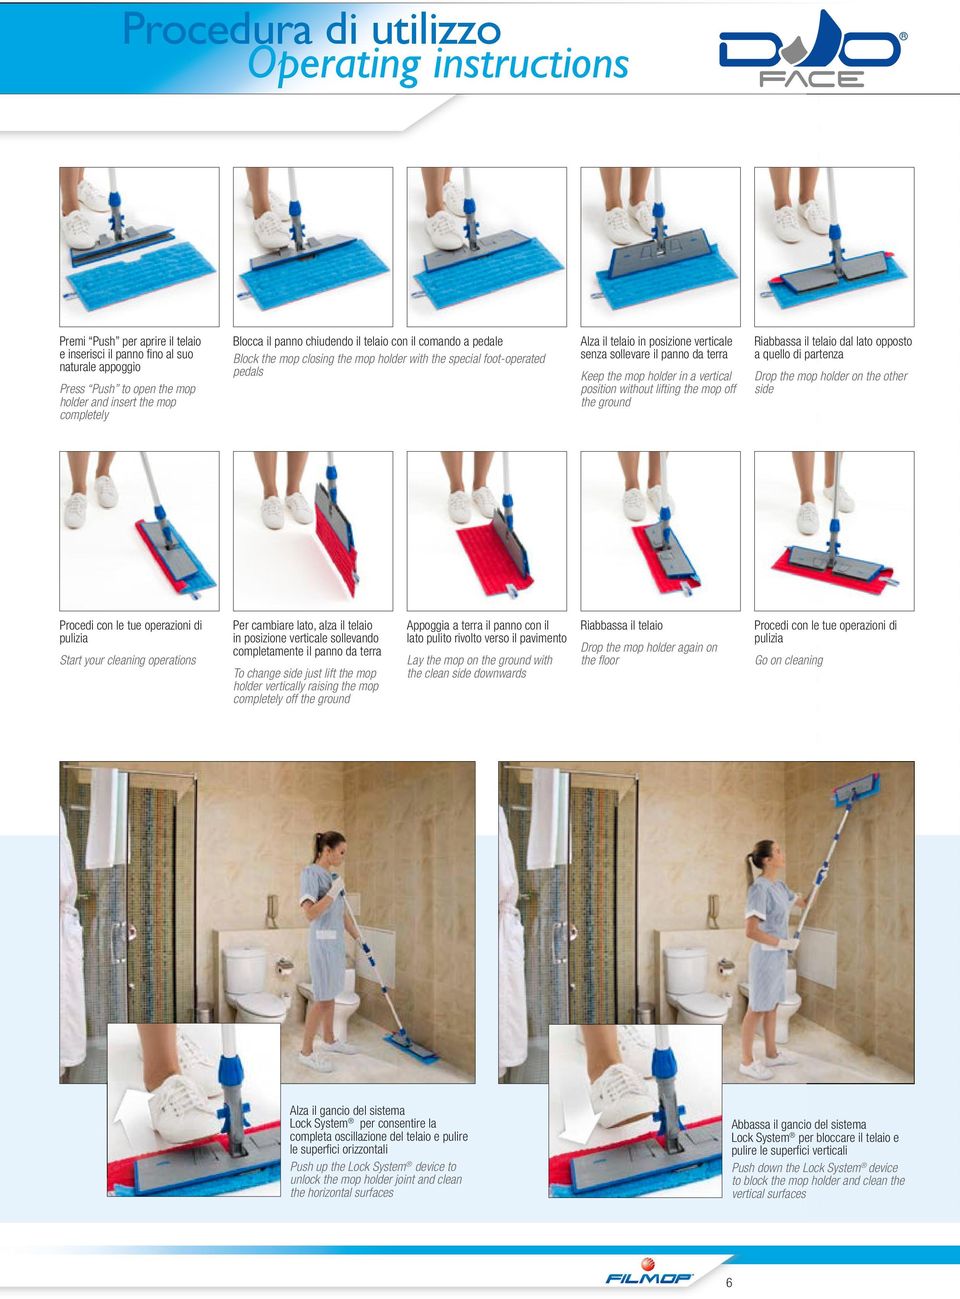 Keep the mop holder in a vertical position without lifting the mop off the ground Riabbassa il telaio dal lato opposto a quello di partenza Drop the mop holder on the other side Procedi con le tue